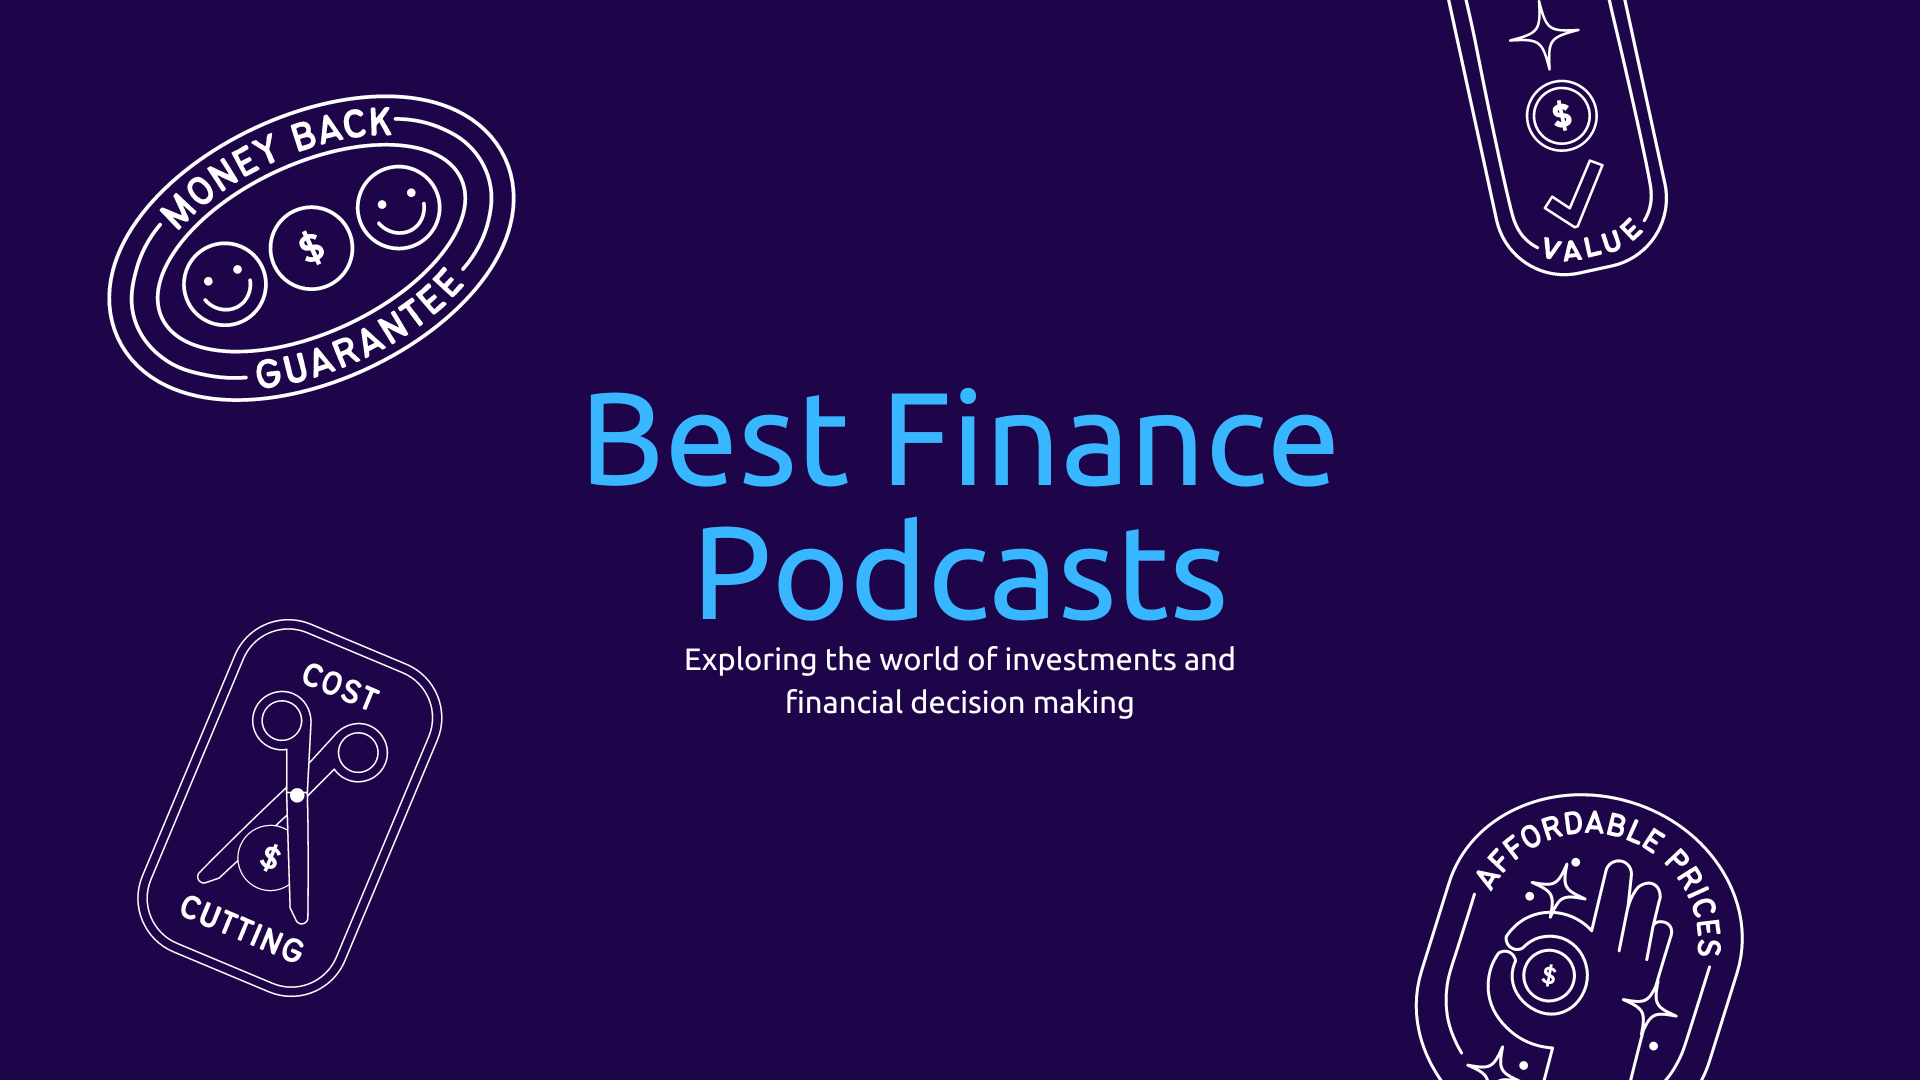 Best Finance Podcasts